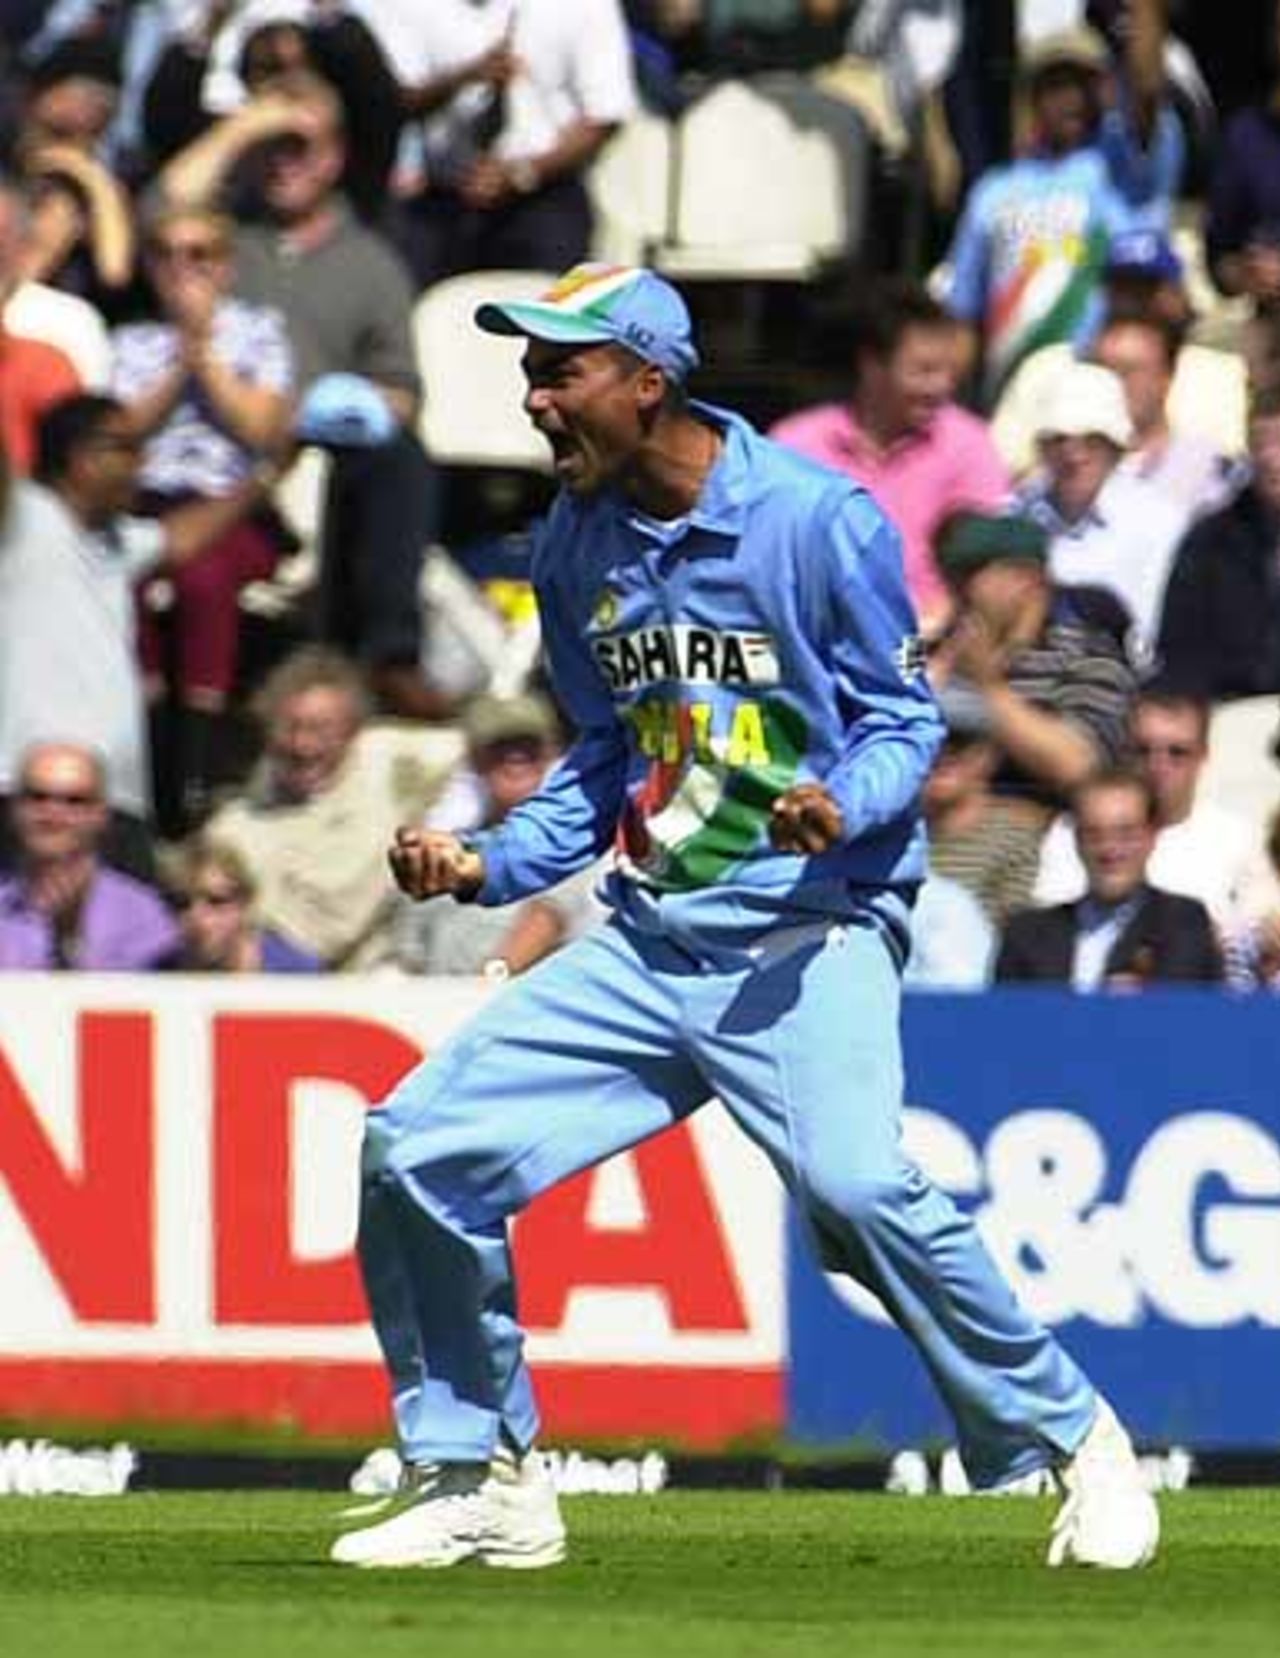 Kaif celebrates his wonderful catch of Knight, England v India at The Oval, July 2002